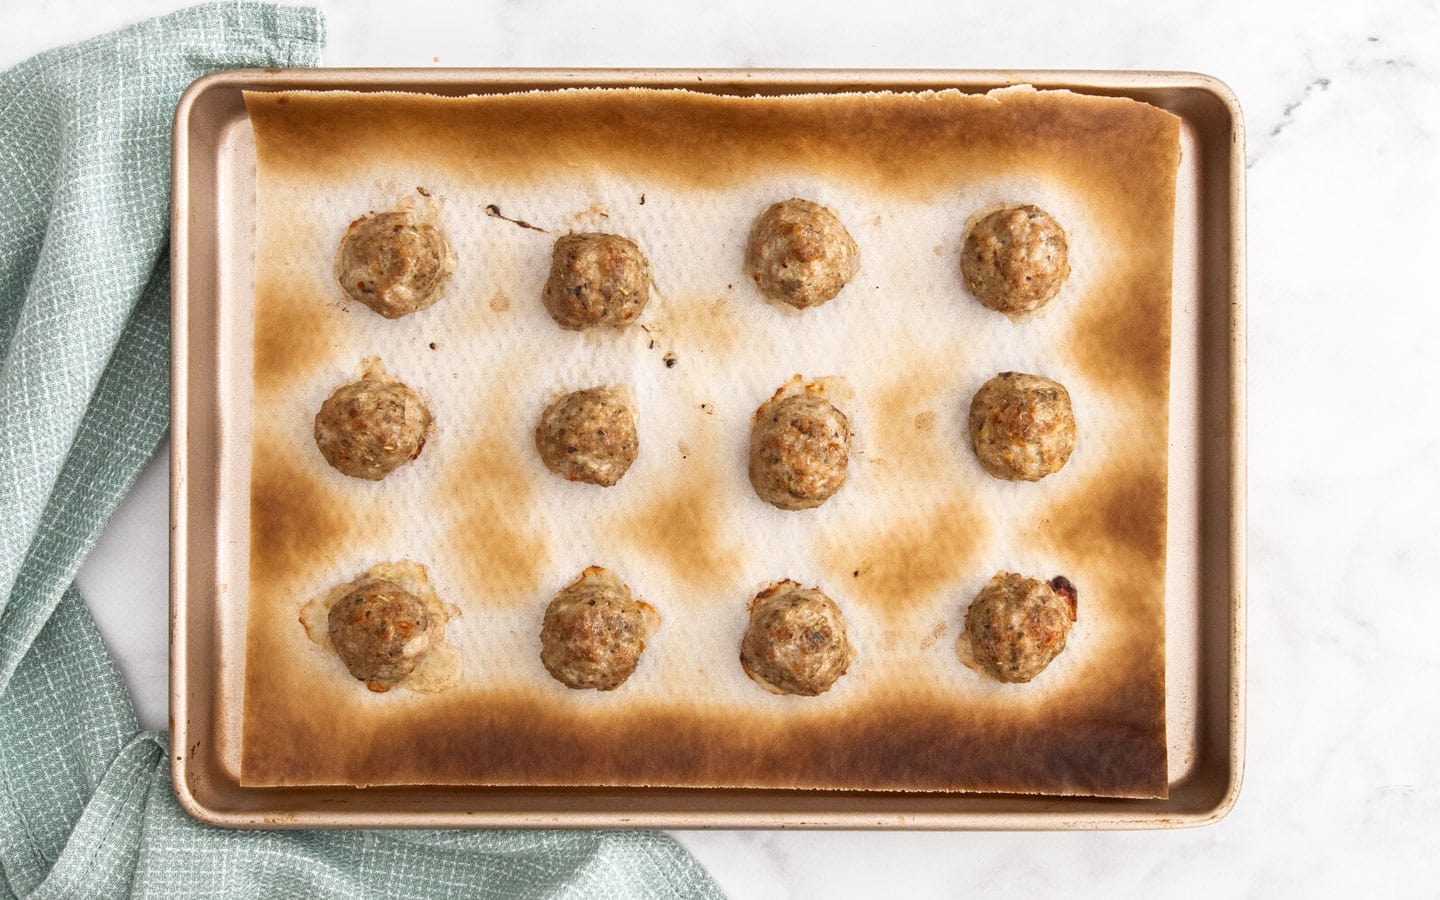 The cooked meatballs on a baking tray.